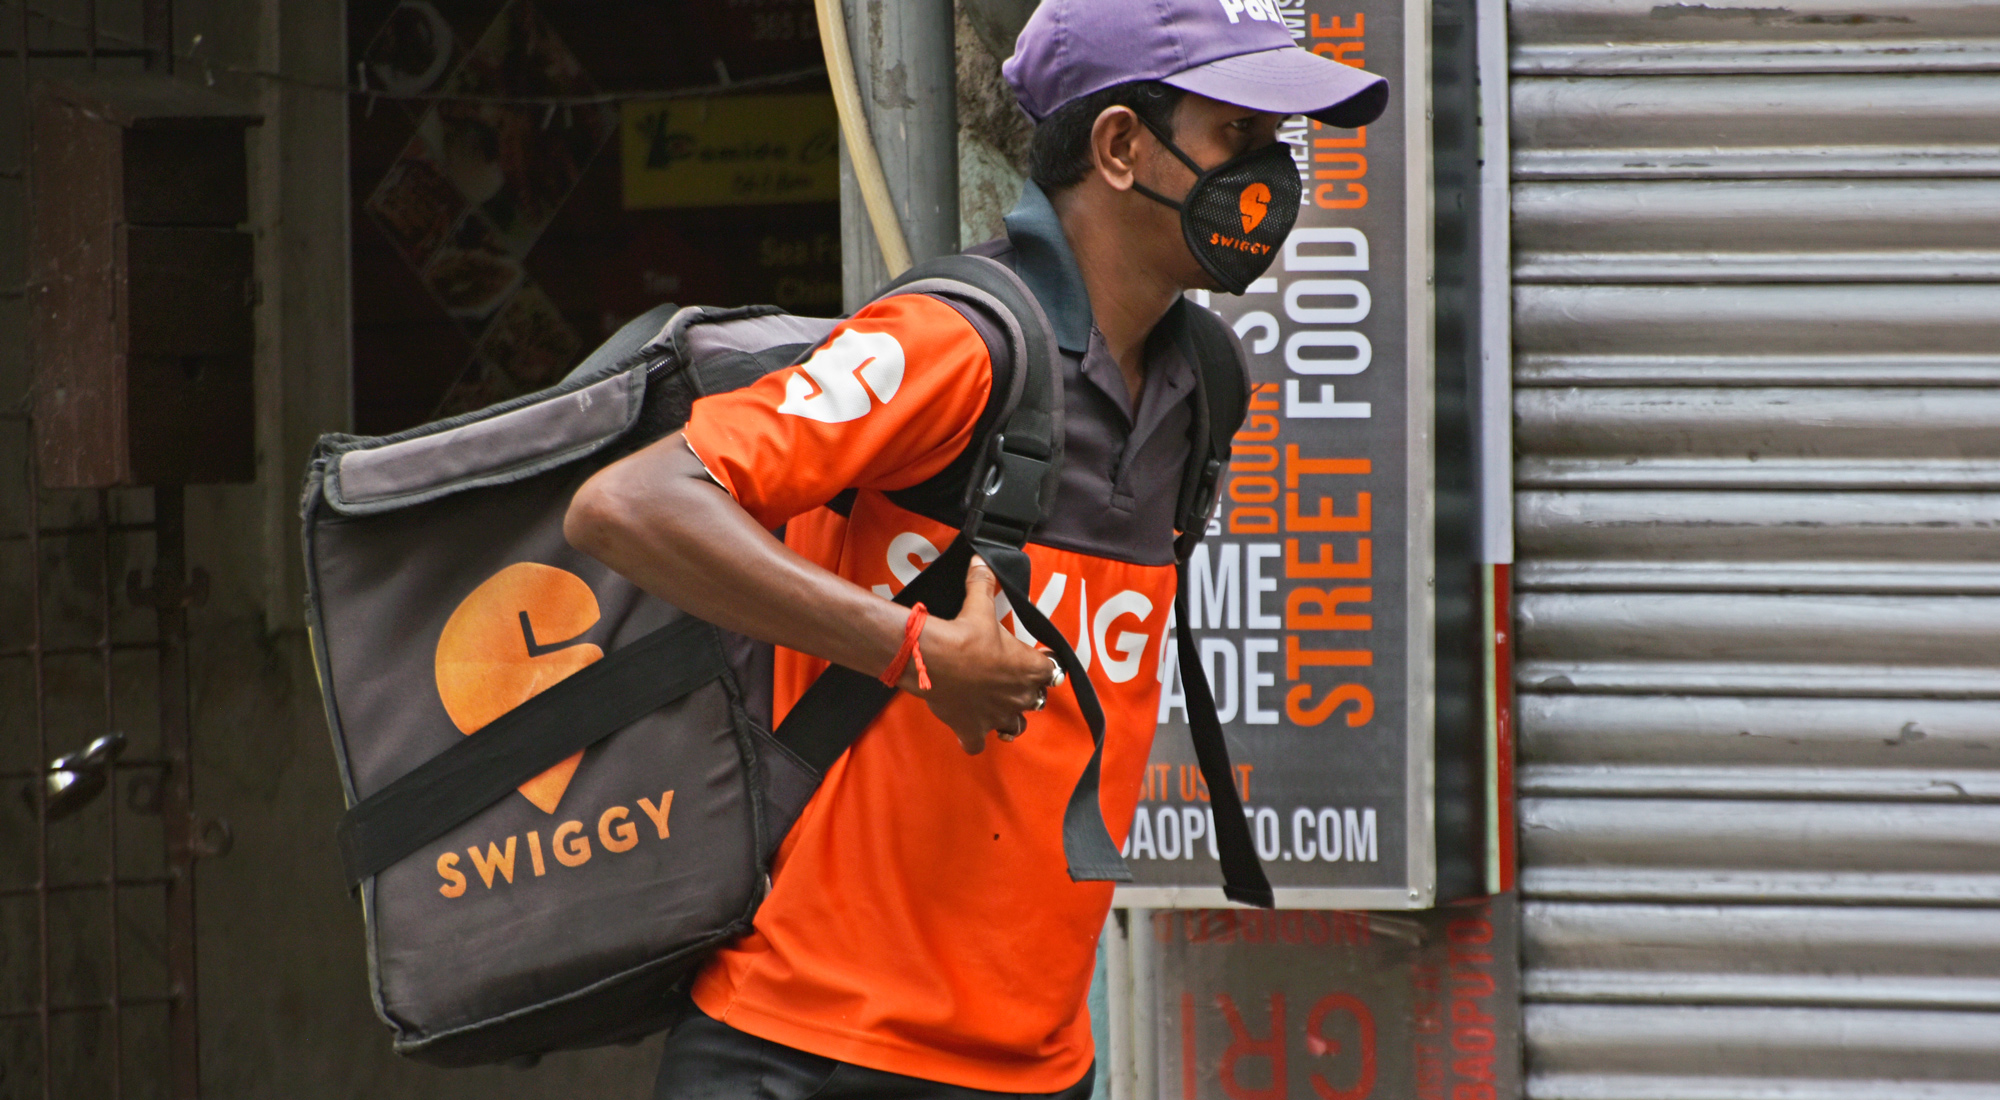 Baron elevates Swiggy’s valuation to $12.16 billion, surpassing its previous value in the private market.